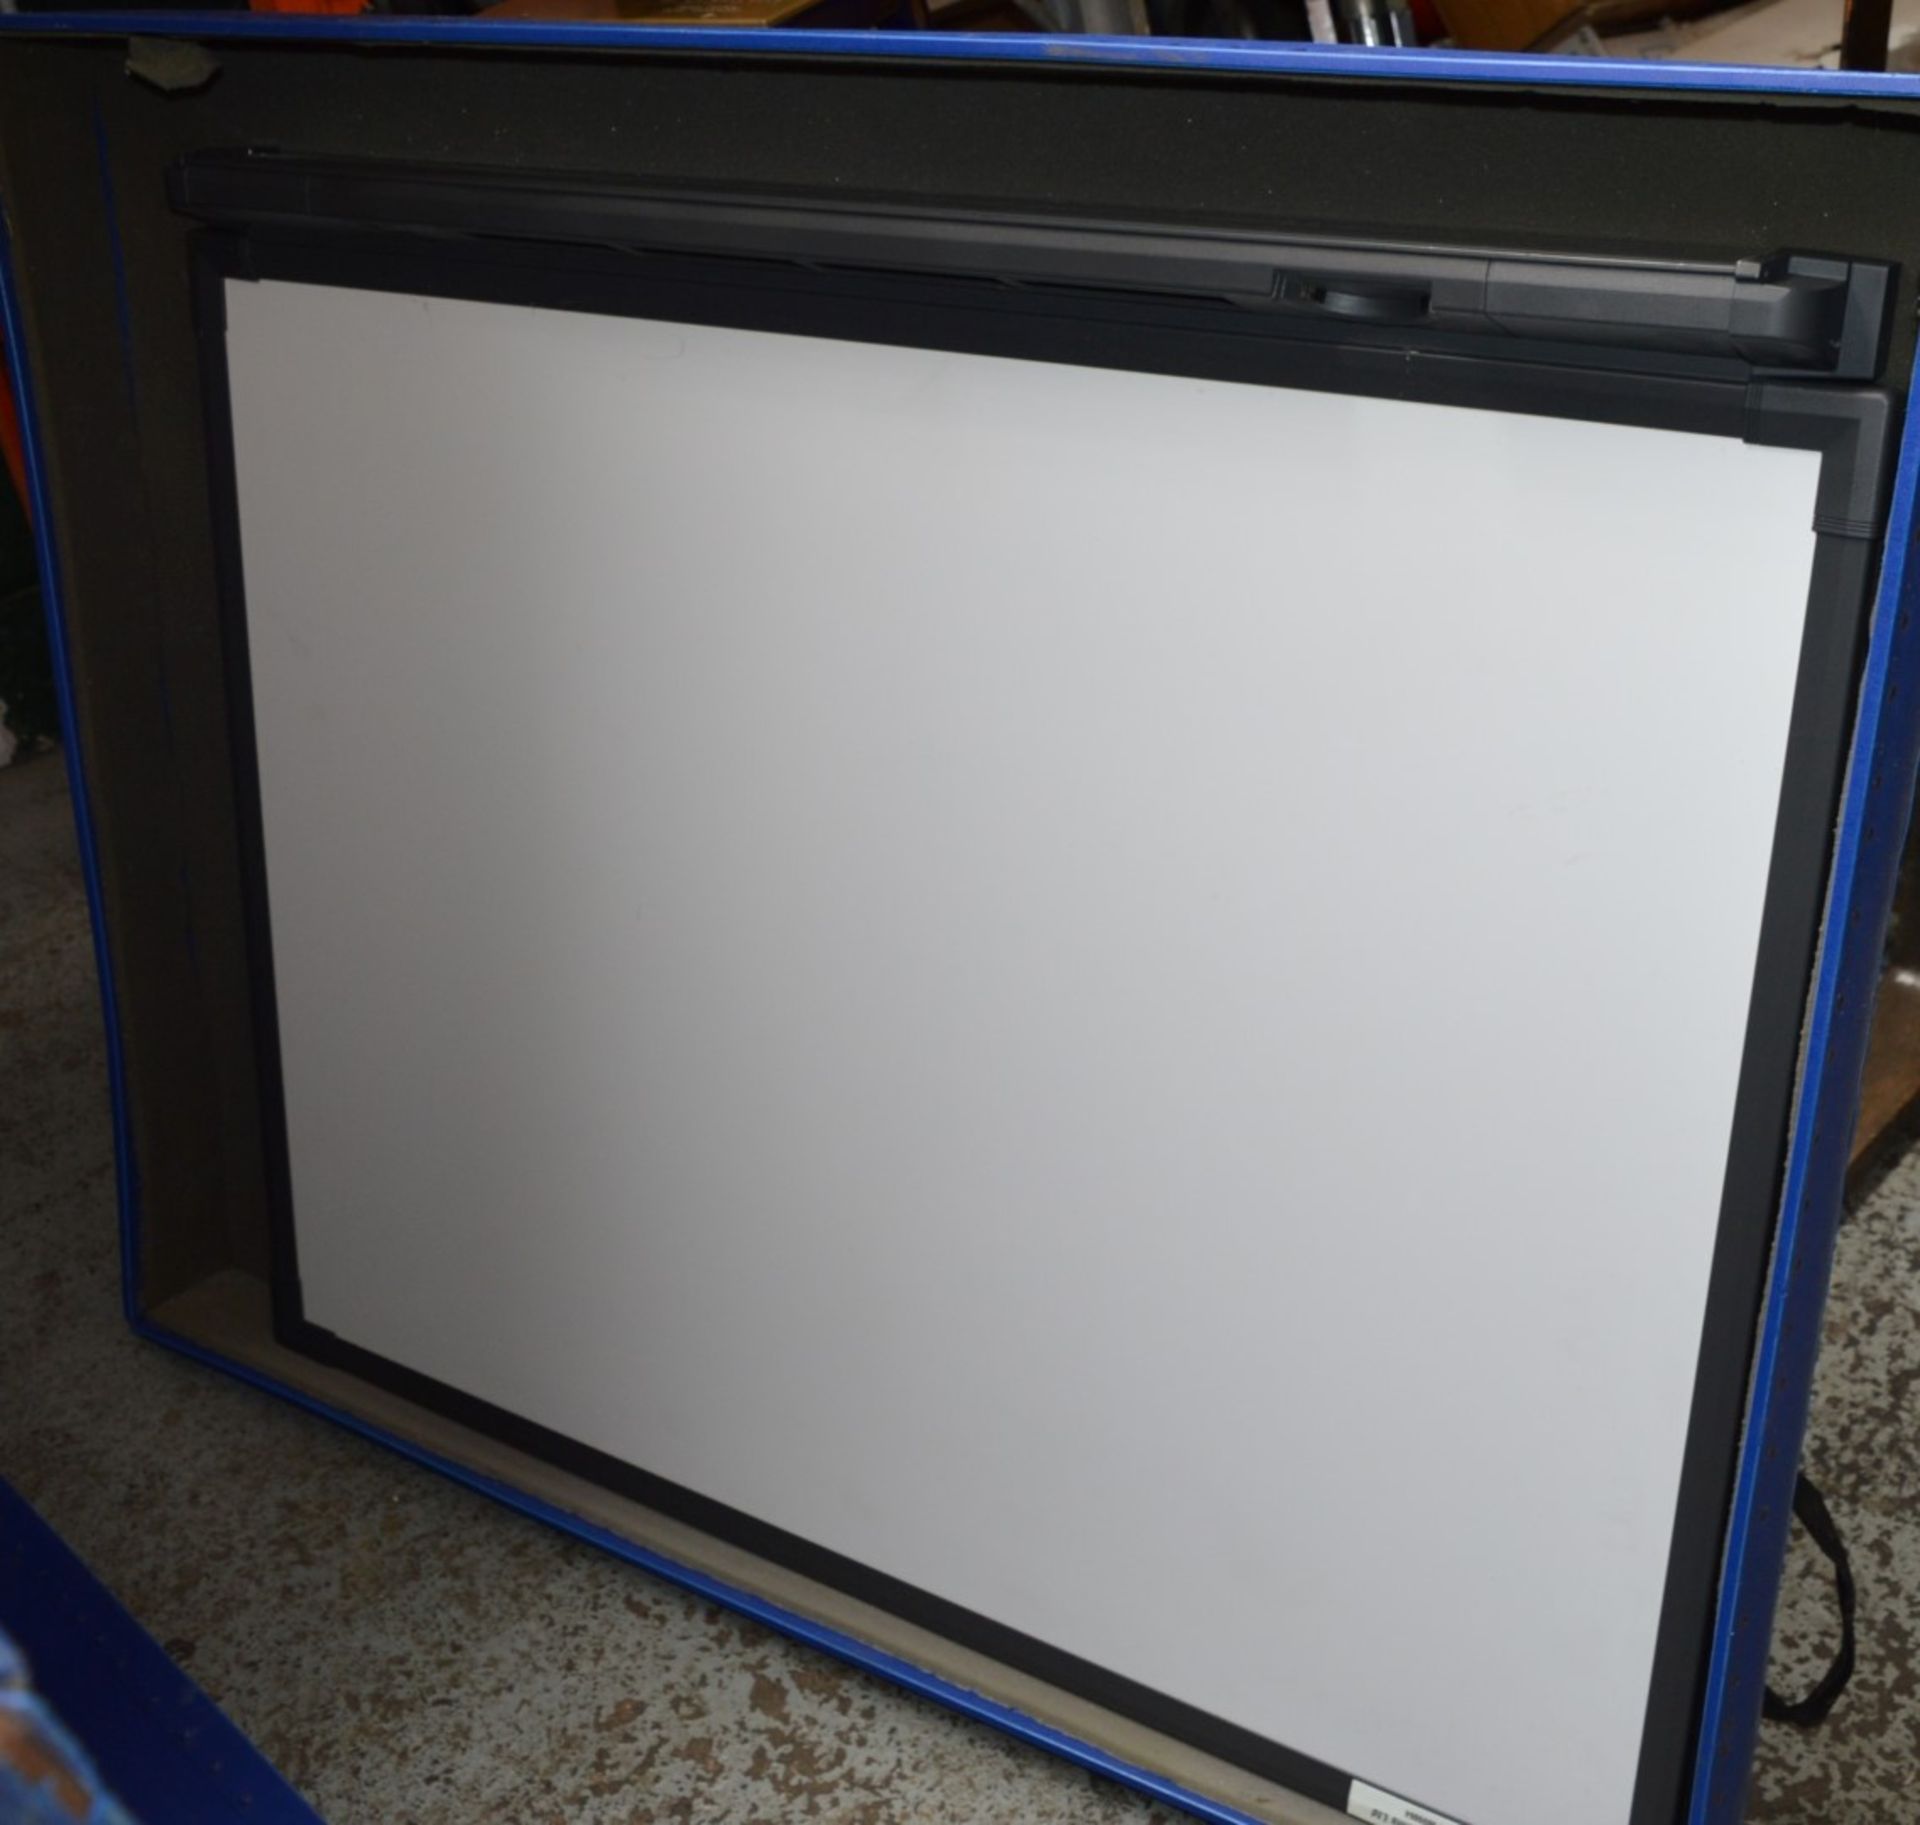 1 x Smart SB560 Interactive Whiteboard - 60 Inch Size - CL089 - With Protection Case - Very Good